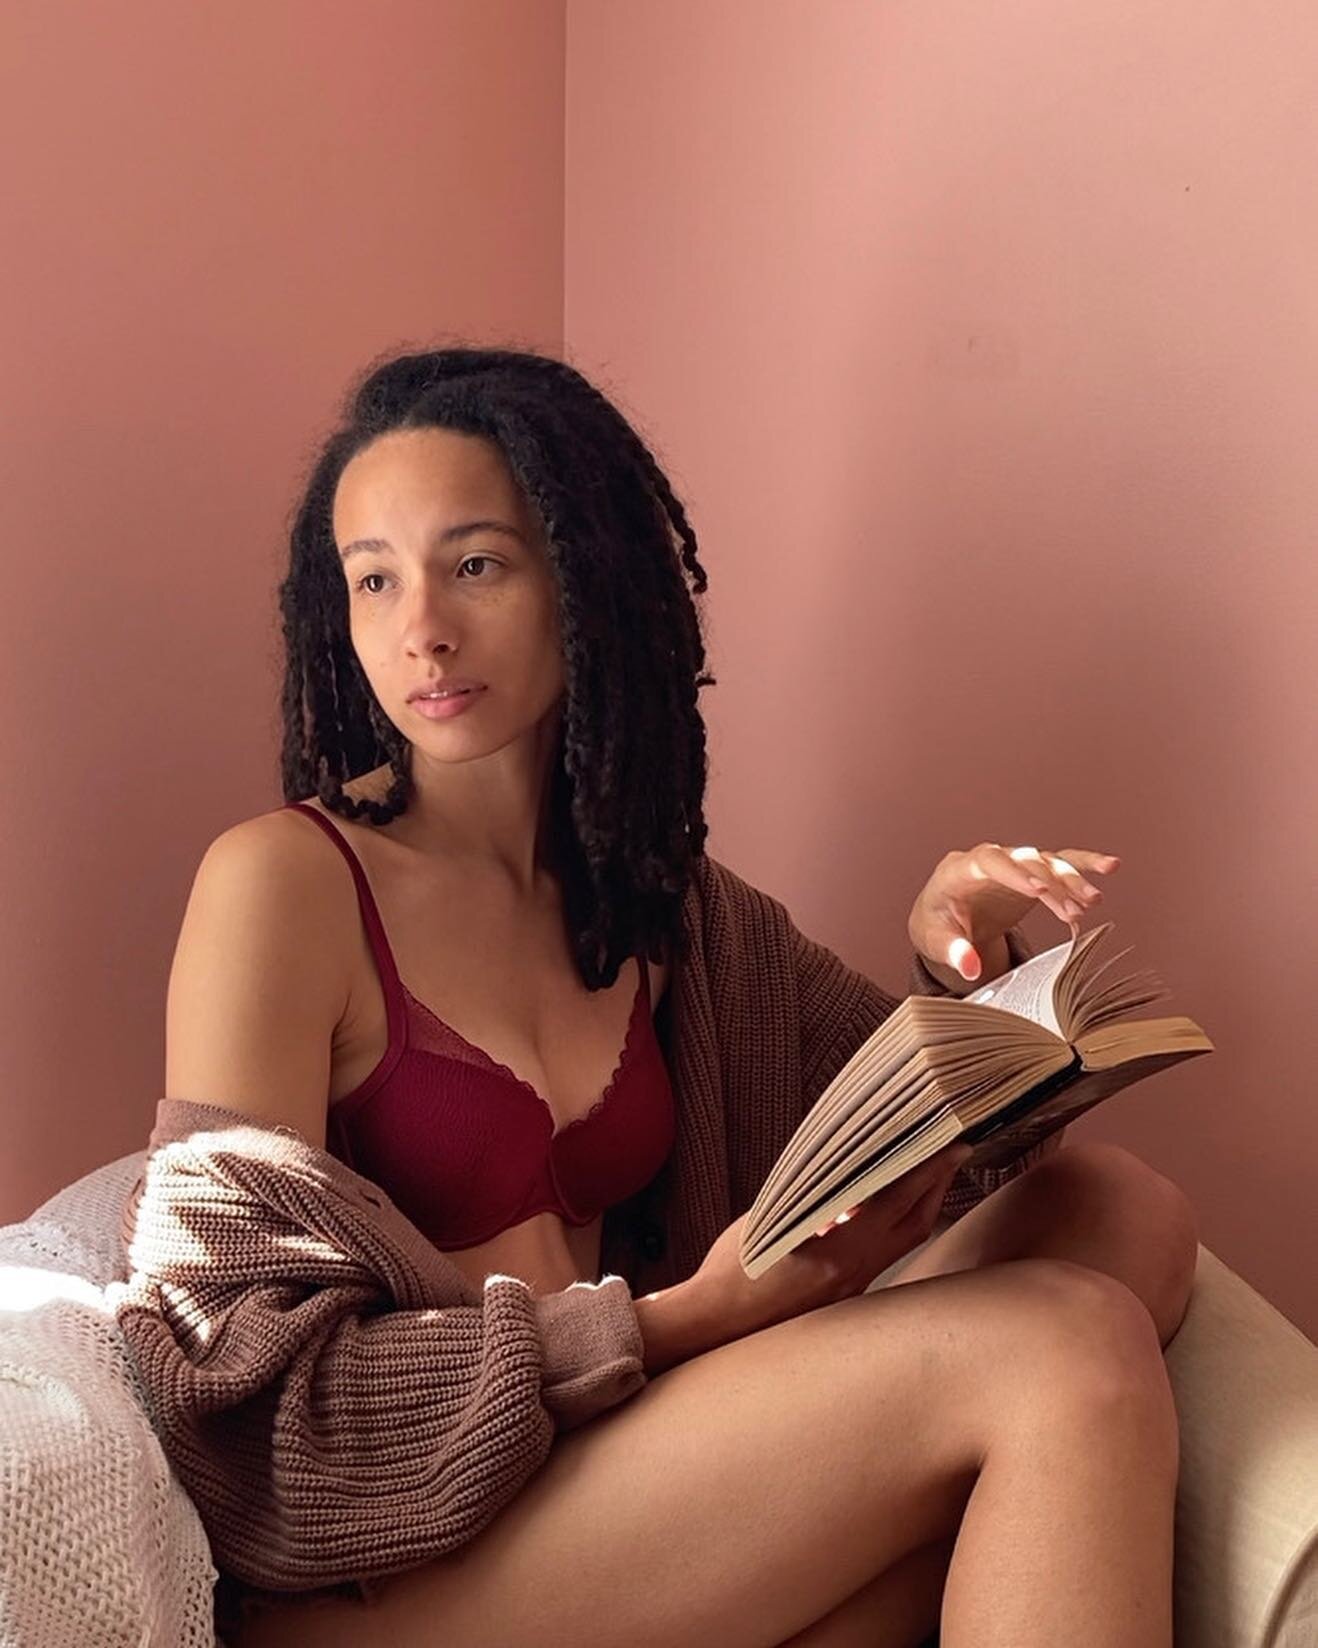 There's just something about wearing just the right shade of red, about the leisure of reading a book in the sunshine, about wearing matching underwear that feels so ✨luxurious✨
⠀⠀⠀⠀⠀⠀⠀⠀⠀
For some reason, bras and undies are the last thing I think ab